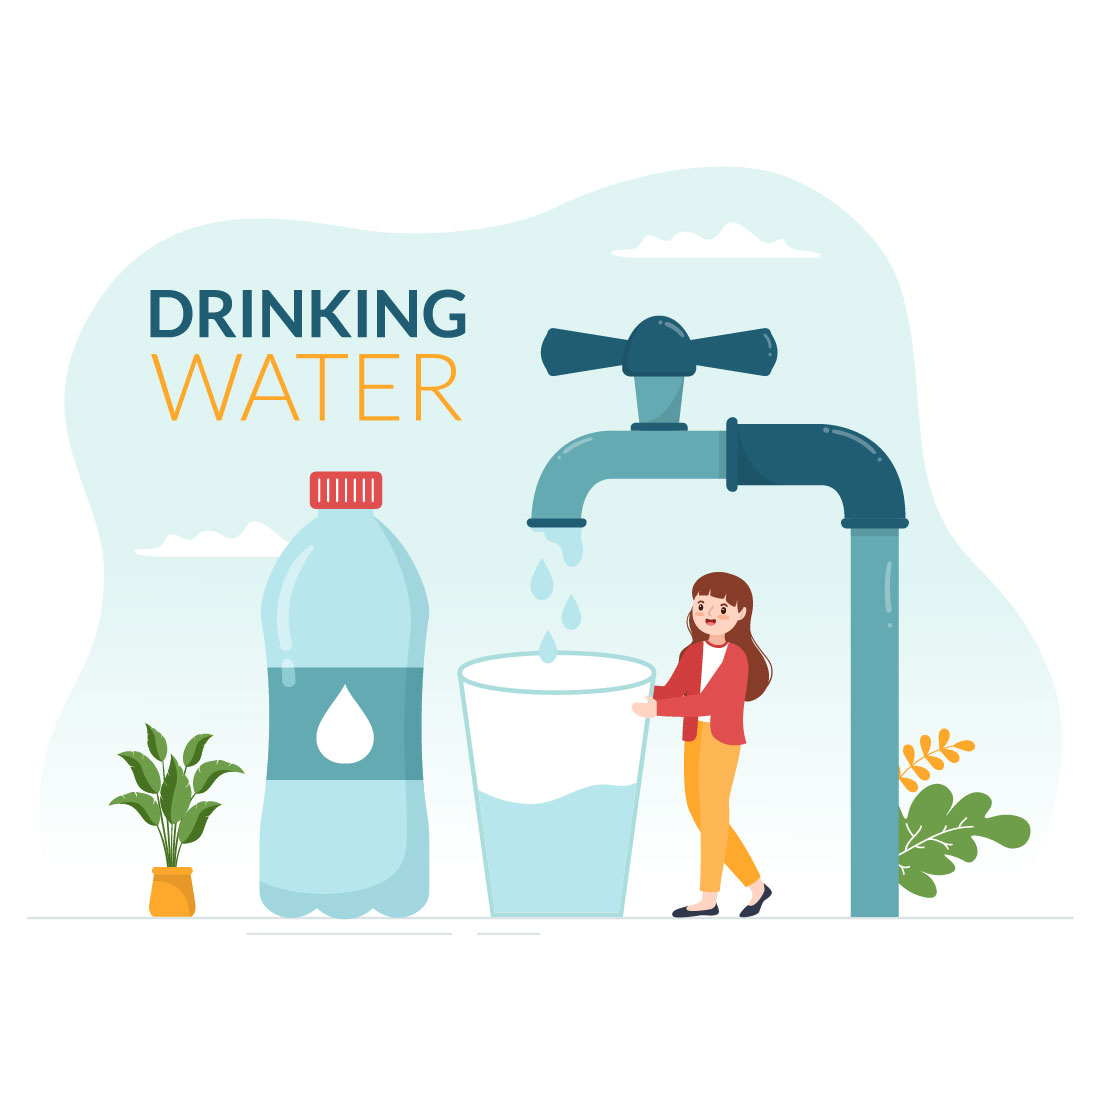 People Drinking Water Design Illustration cover image.